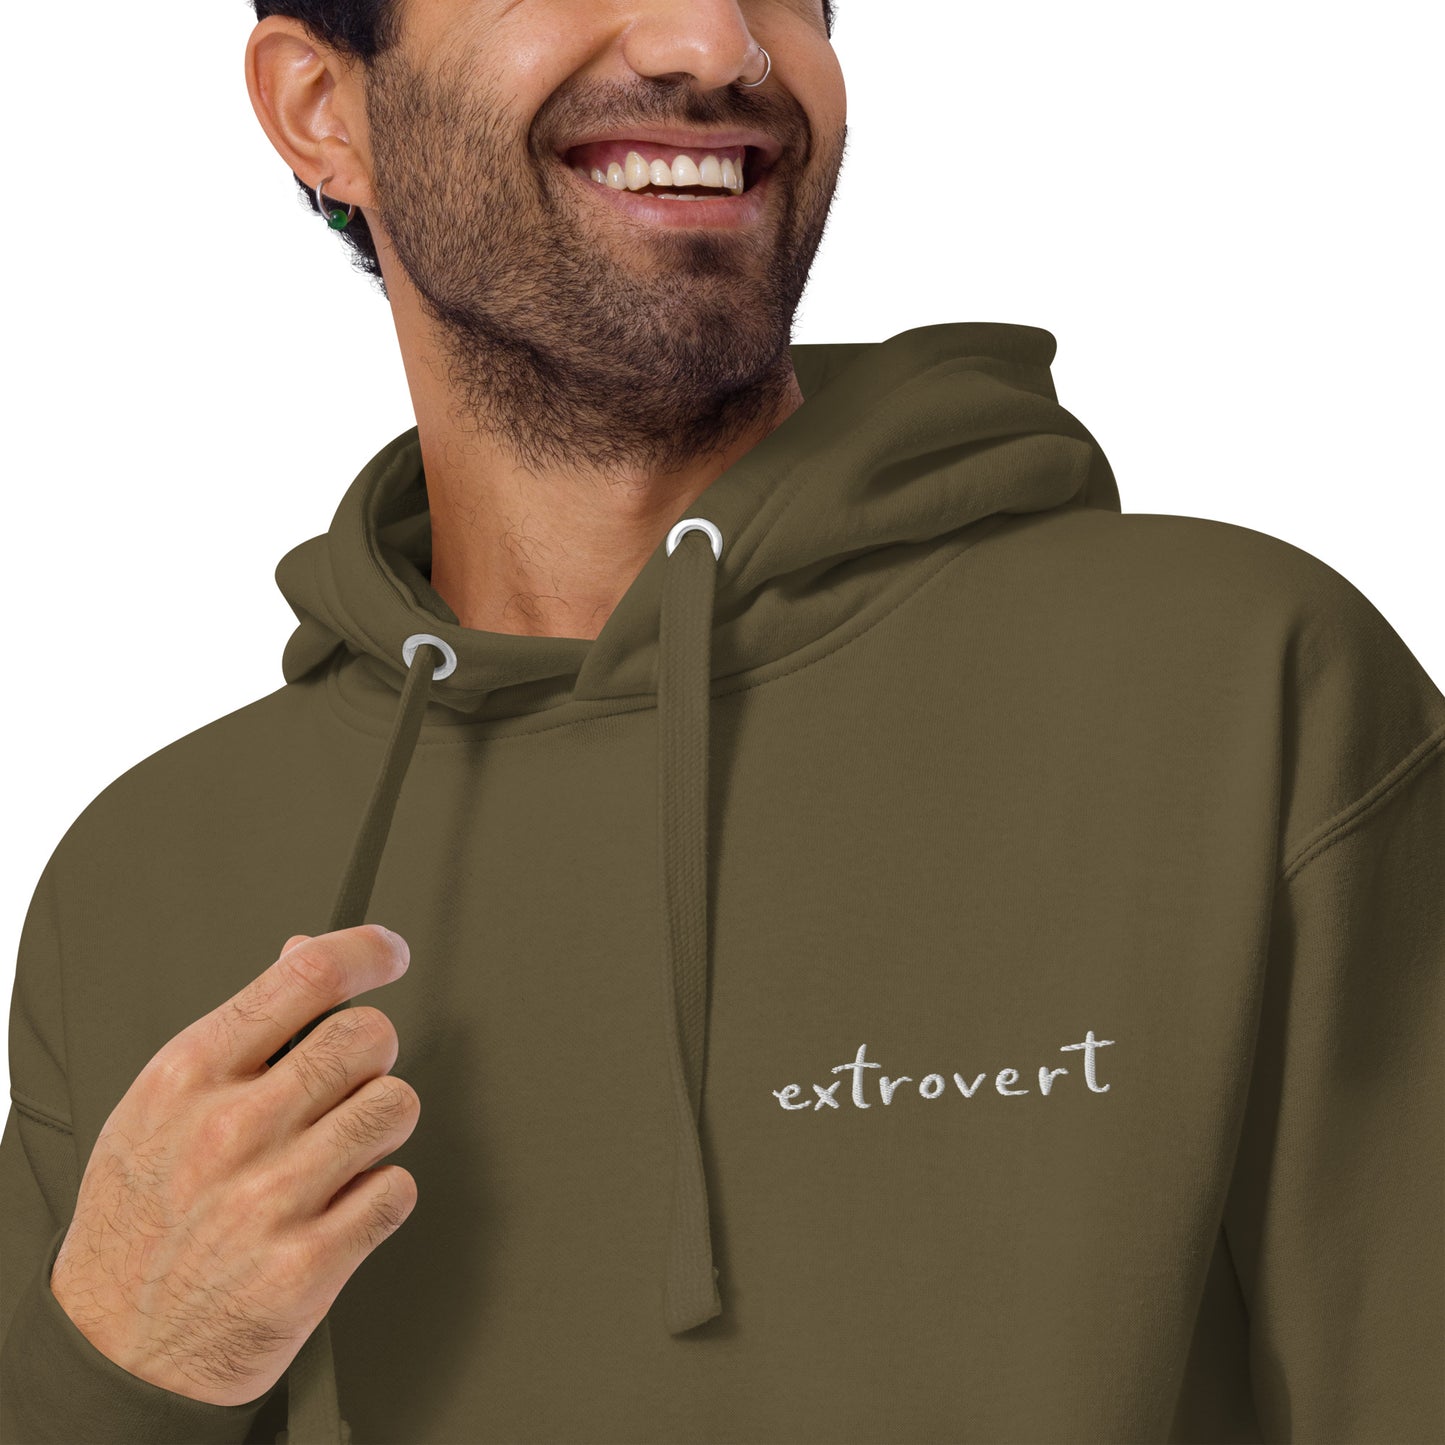 Embroidered Hoodie "extrovert"